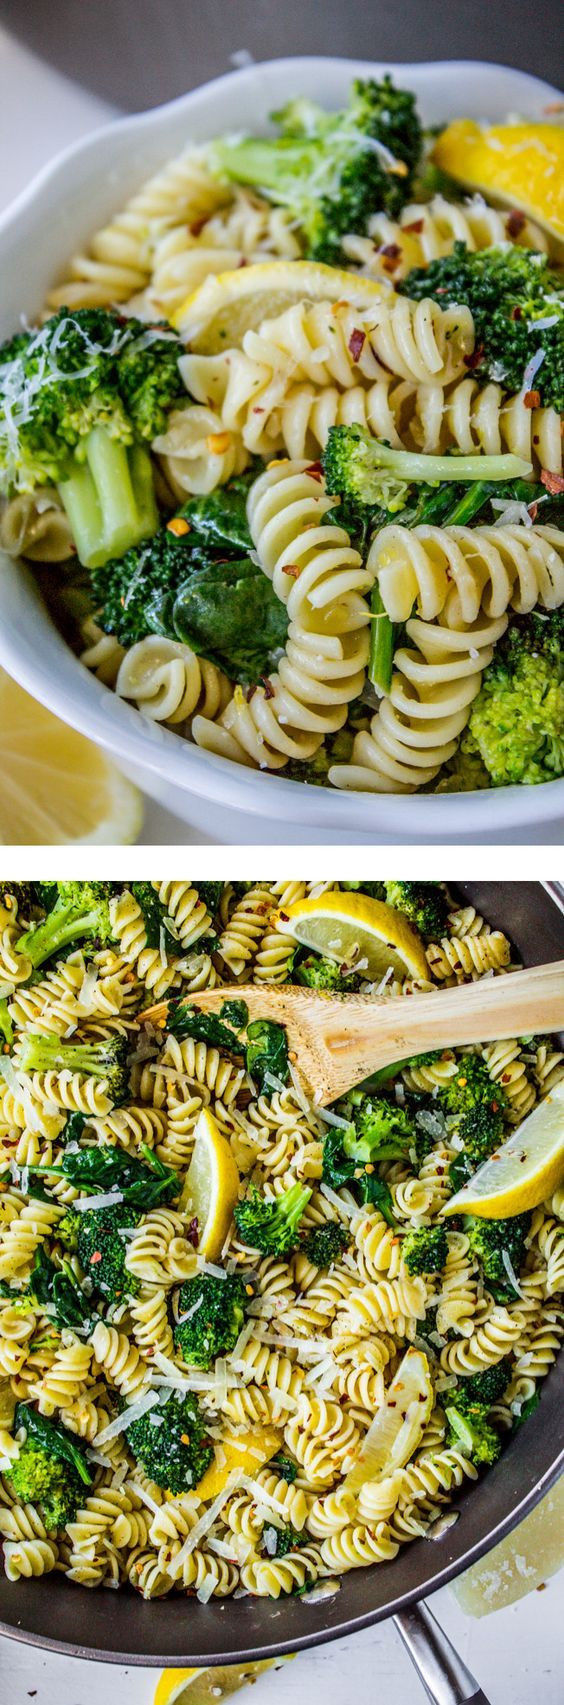 Super Easy Healthy Dinners
 100 Easy healthy recipes on Pinterest